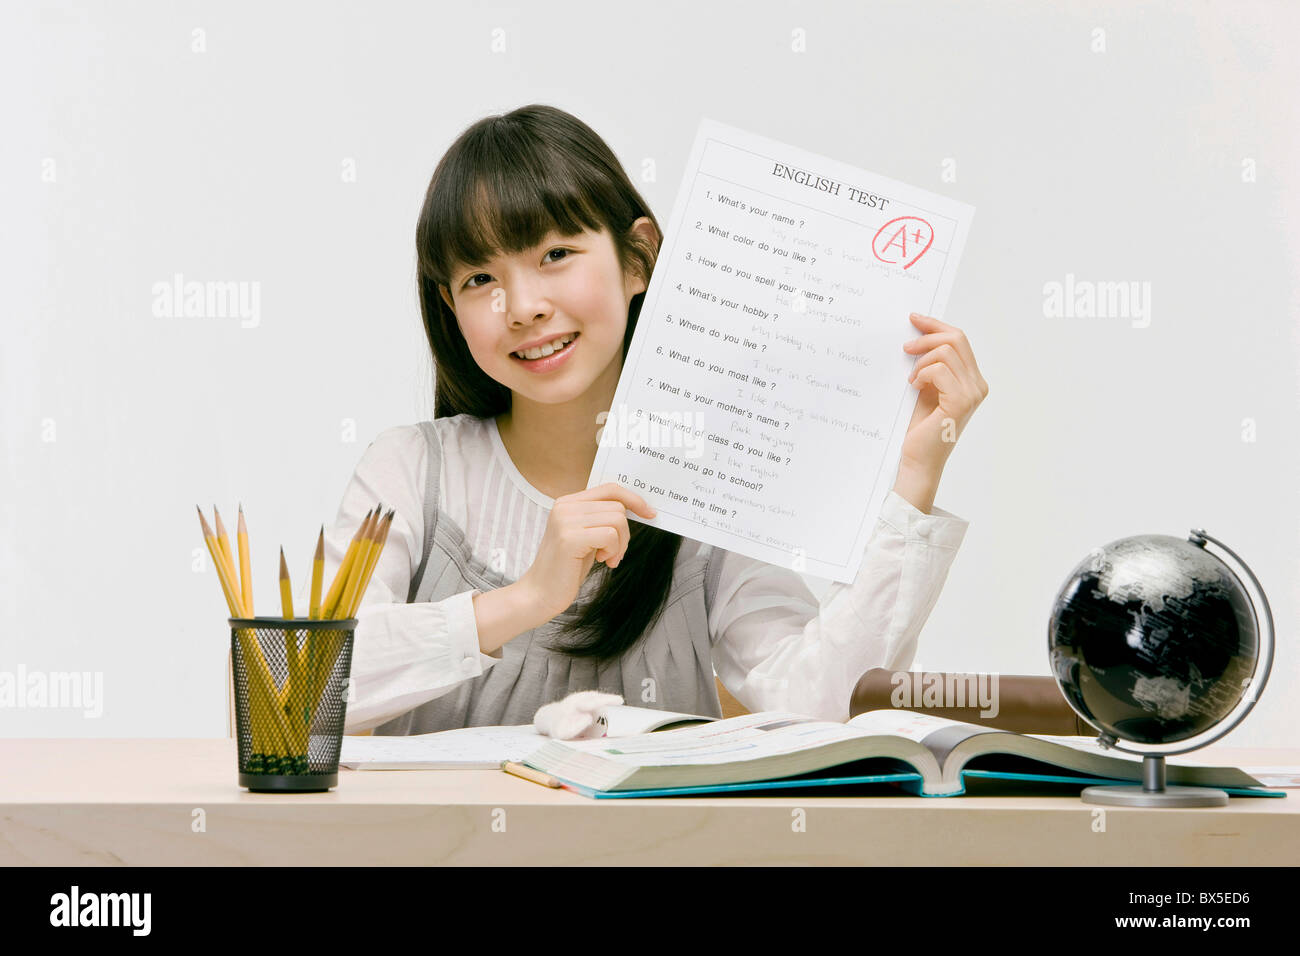 Girl holding English test with perfect score, close-up Stock Photo